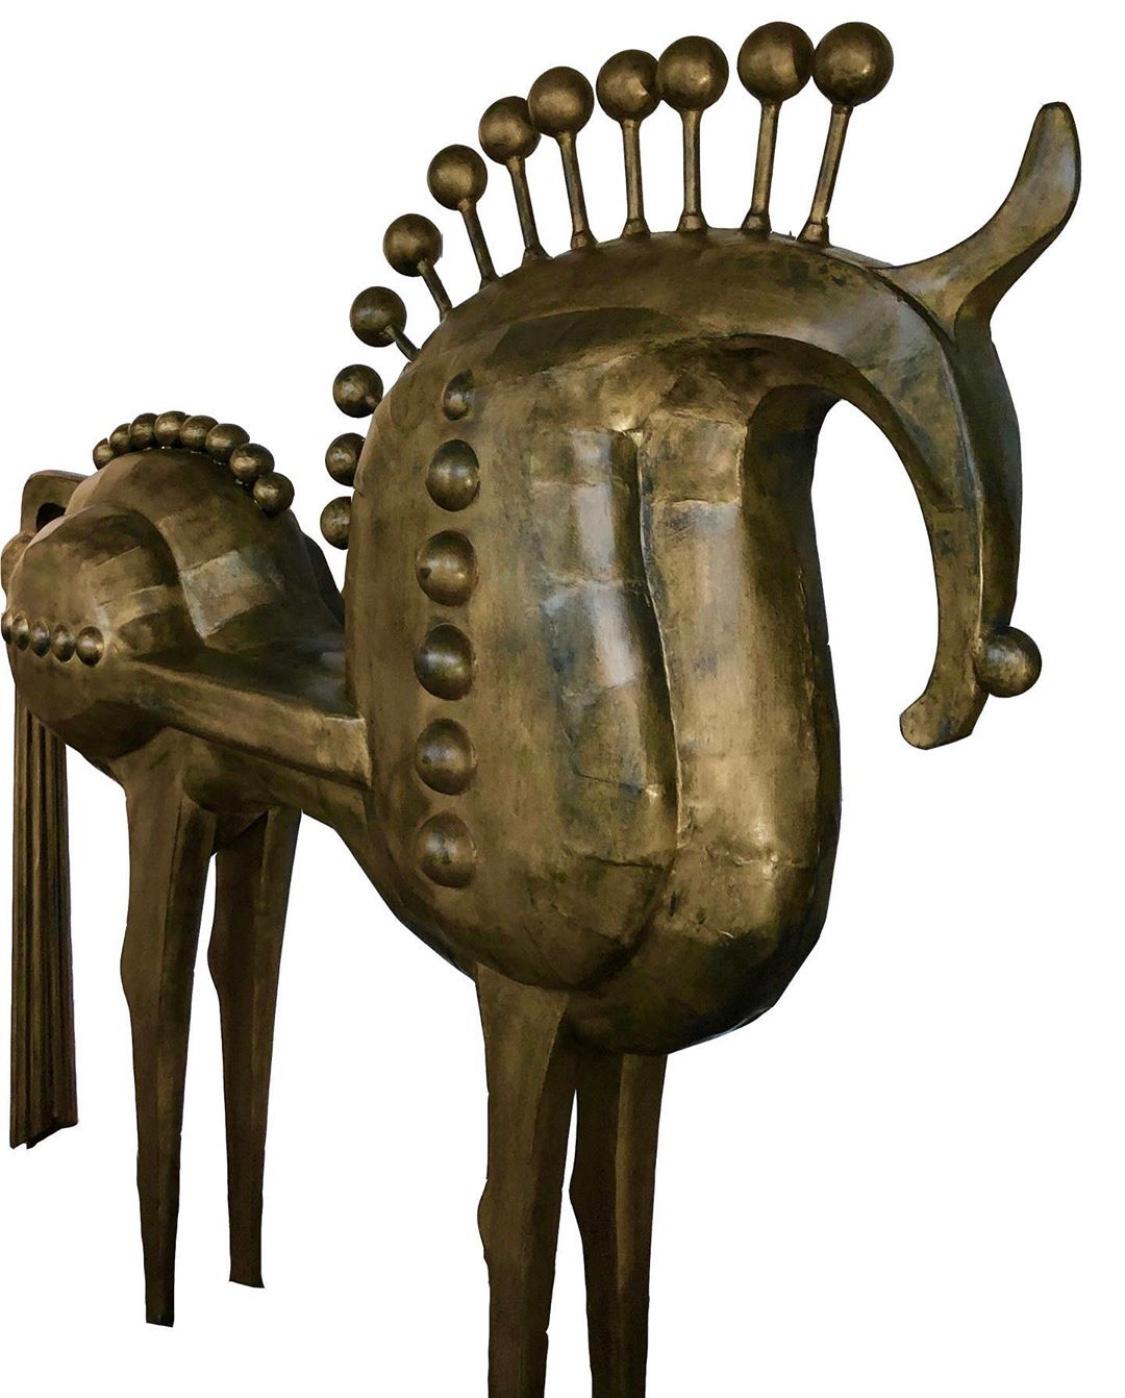 A superb horse in bronze metal with a golden sheen – this artist took great inspiration from the animal statuettes dedicated at Olympia, found in sanctuaries in the 8th century BC. The horse, symbolically aristocratic and a favorite among gods and